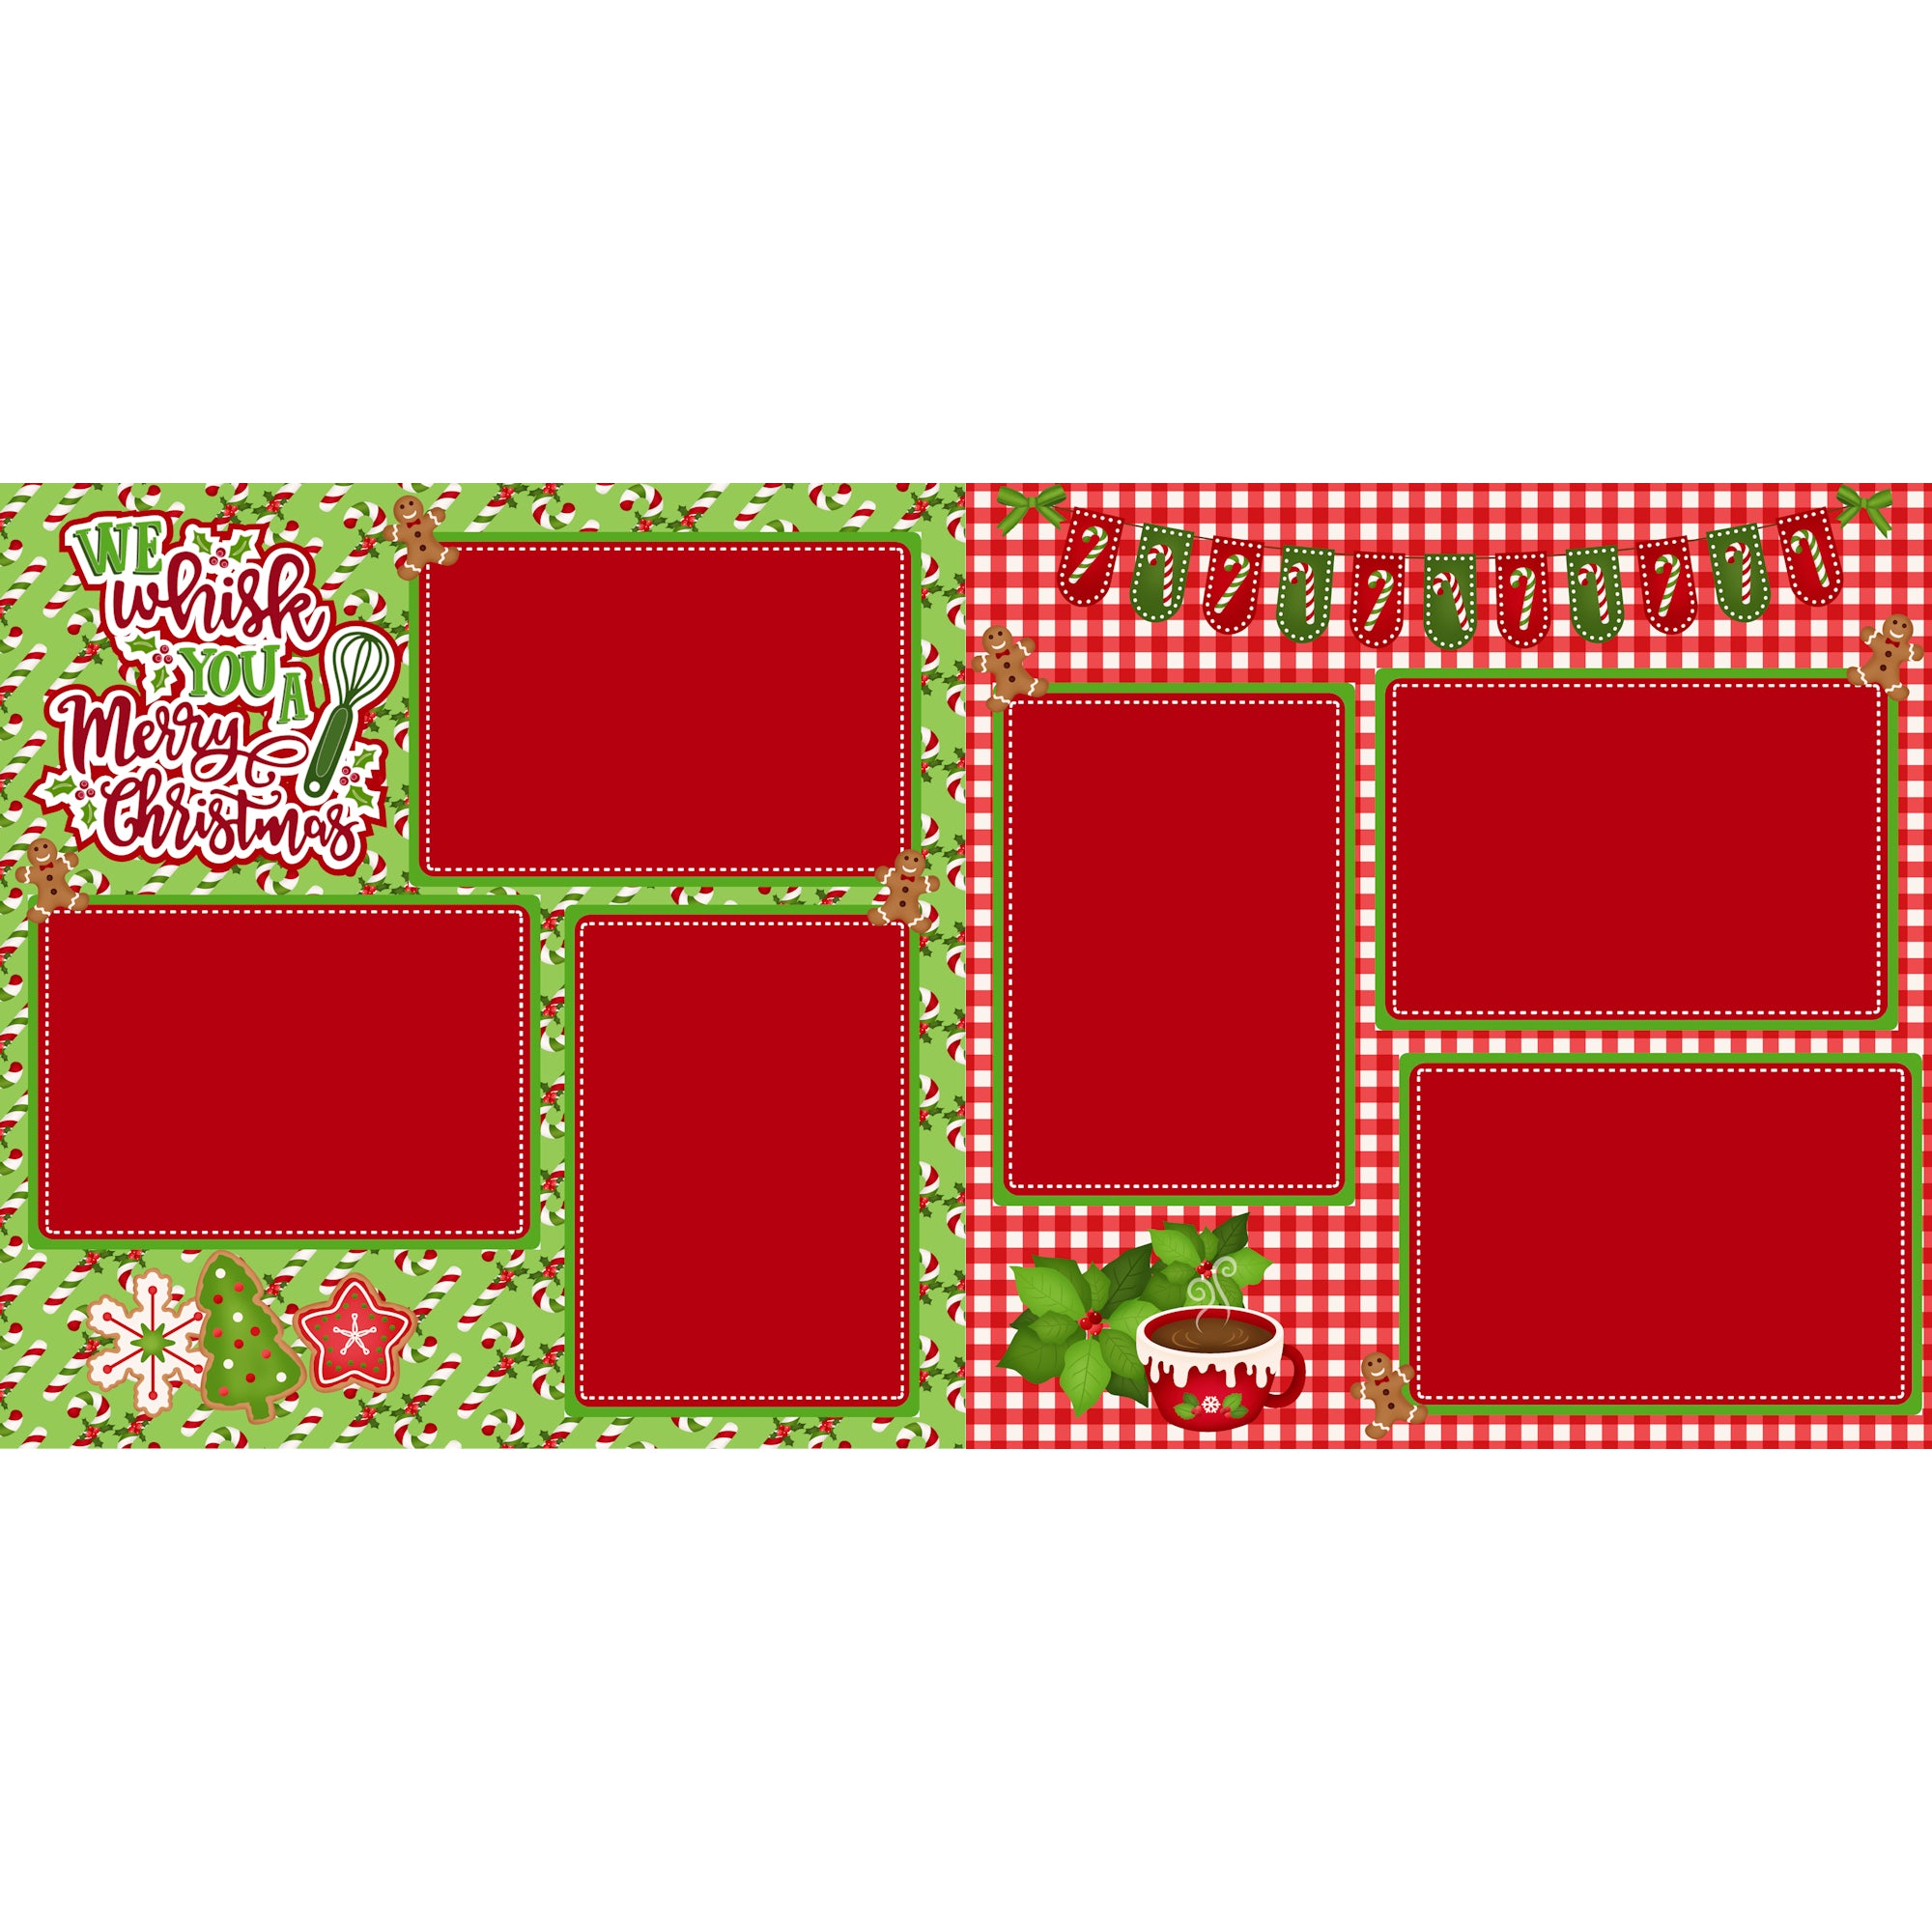 Christmas scrapbook pages, Christmas scrapbook layouts